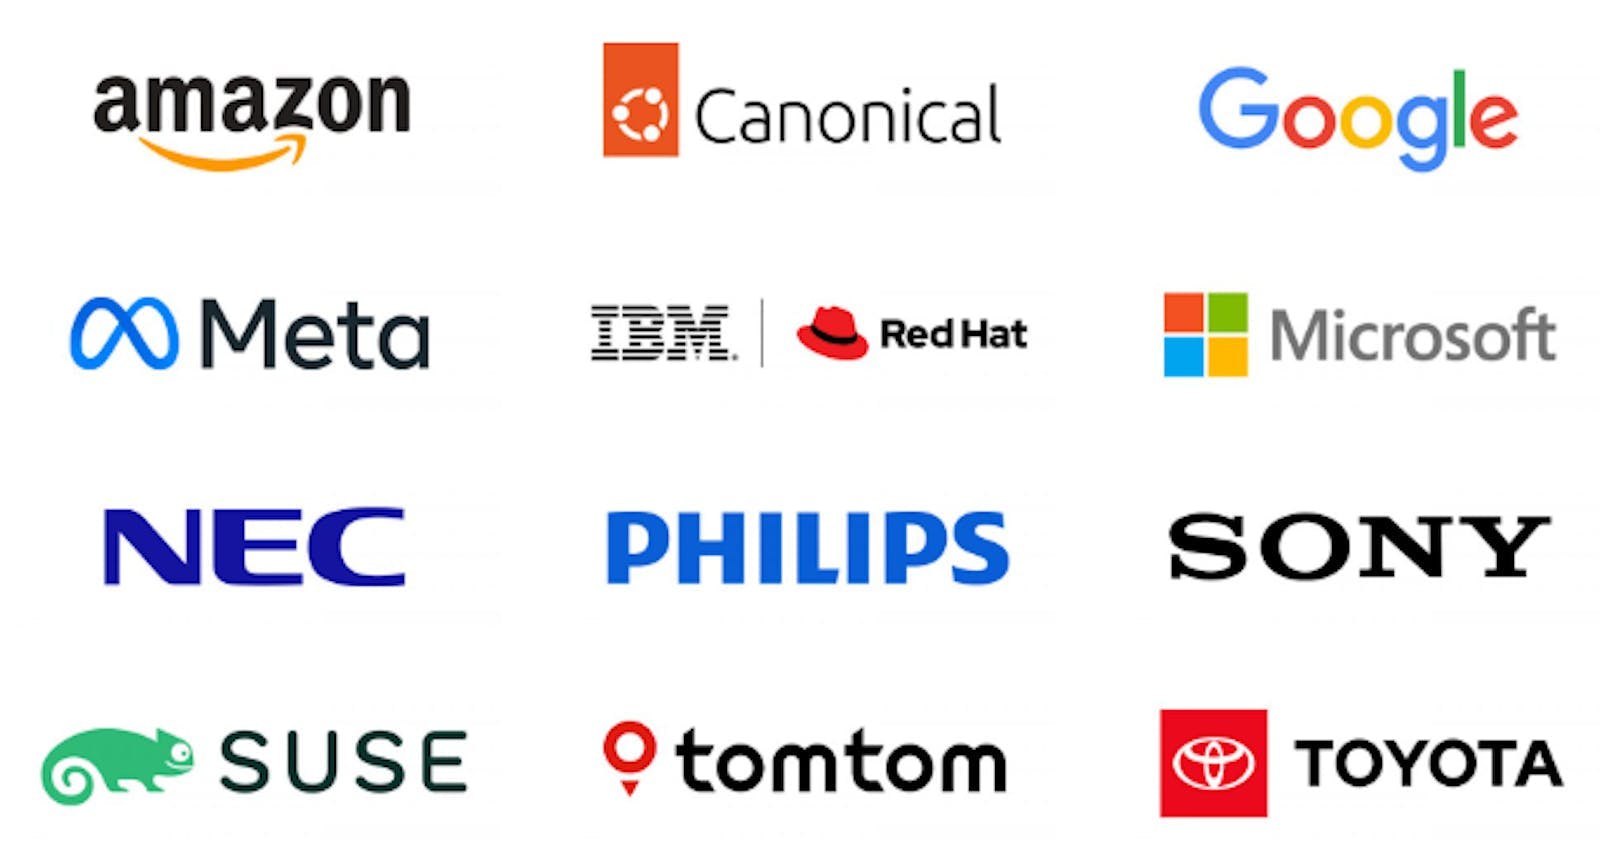 Selection of organisations that are members of the Open Invention Network